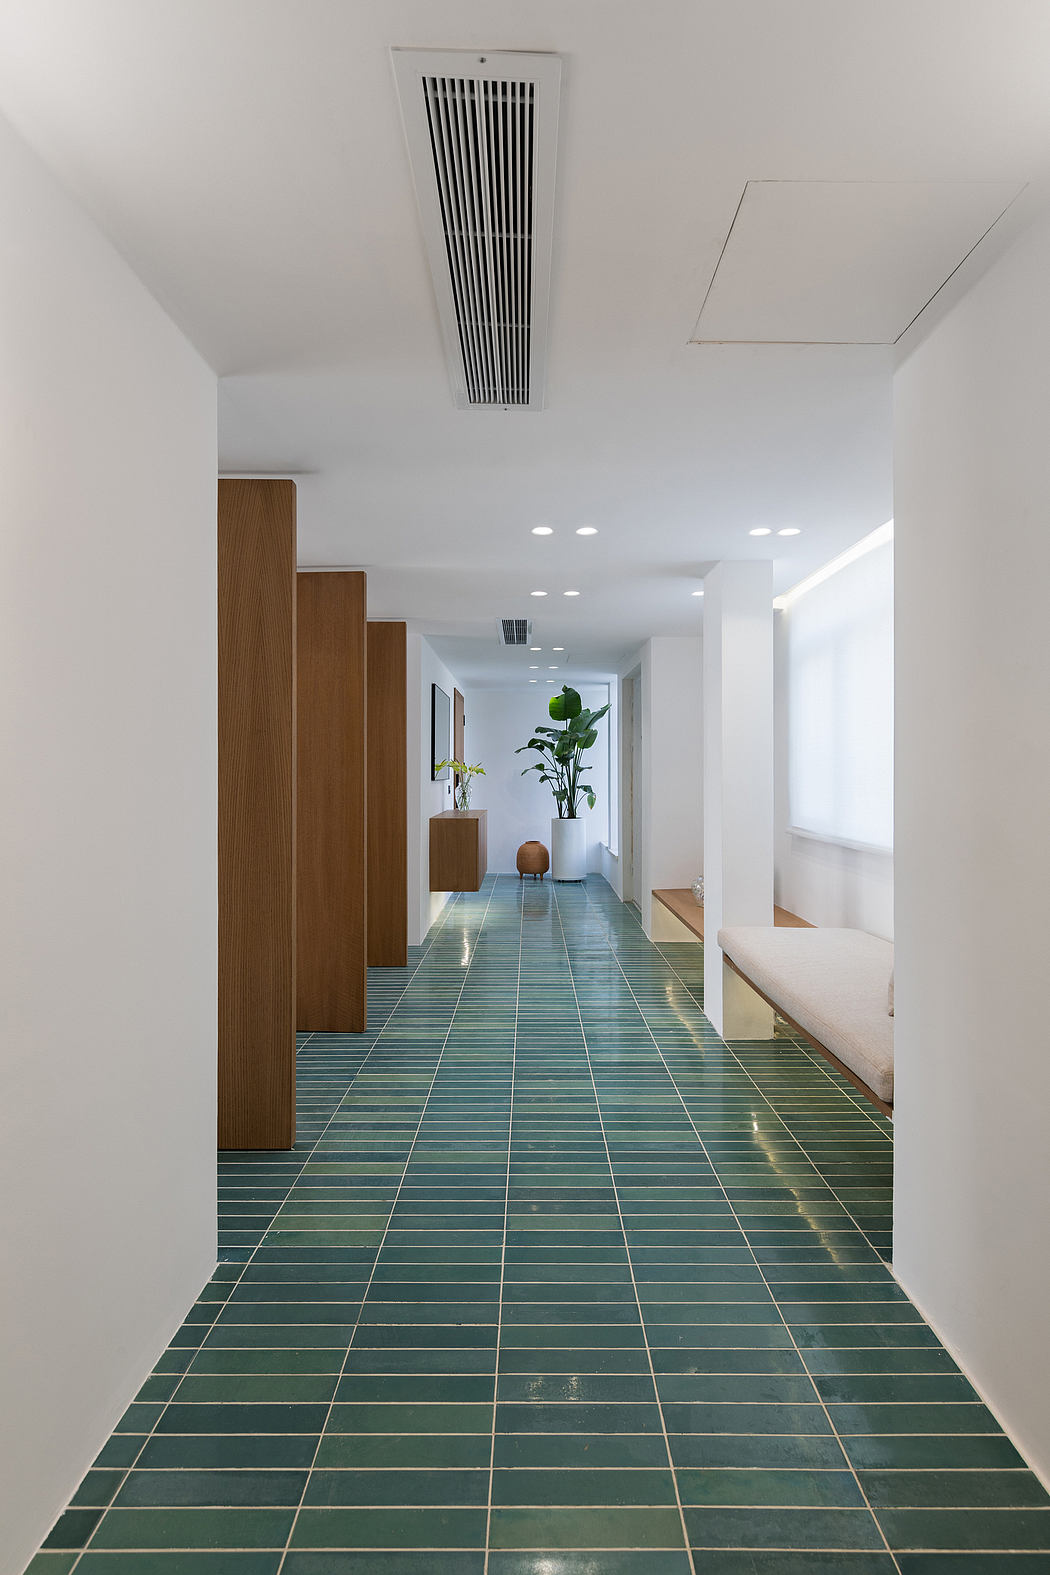 Sleek modern interior with wood accents, textured green tiles, and overhead ventilation.